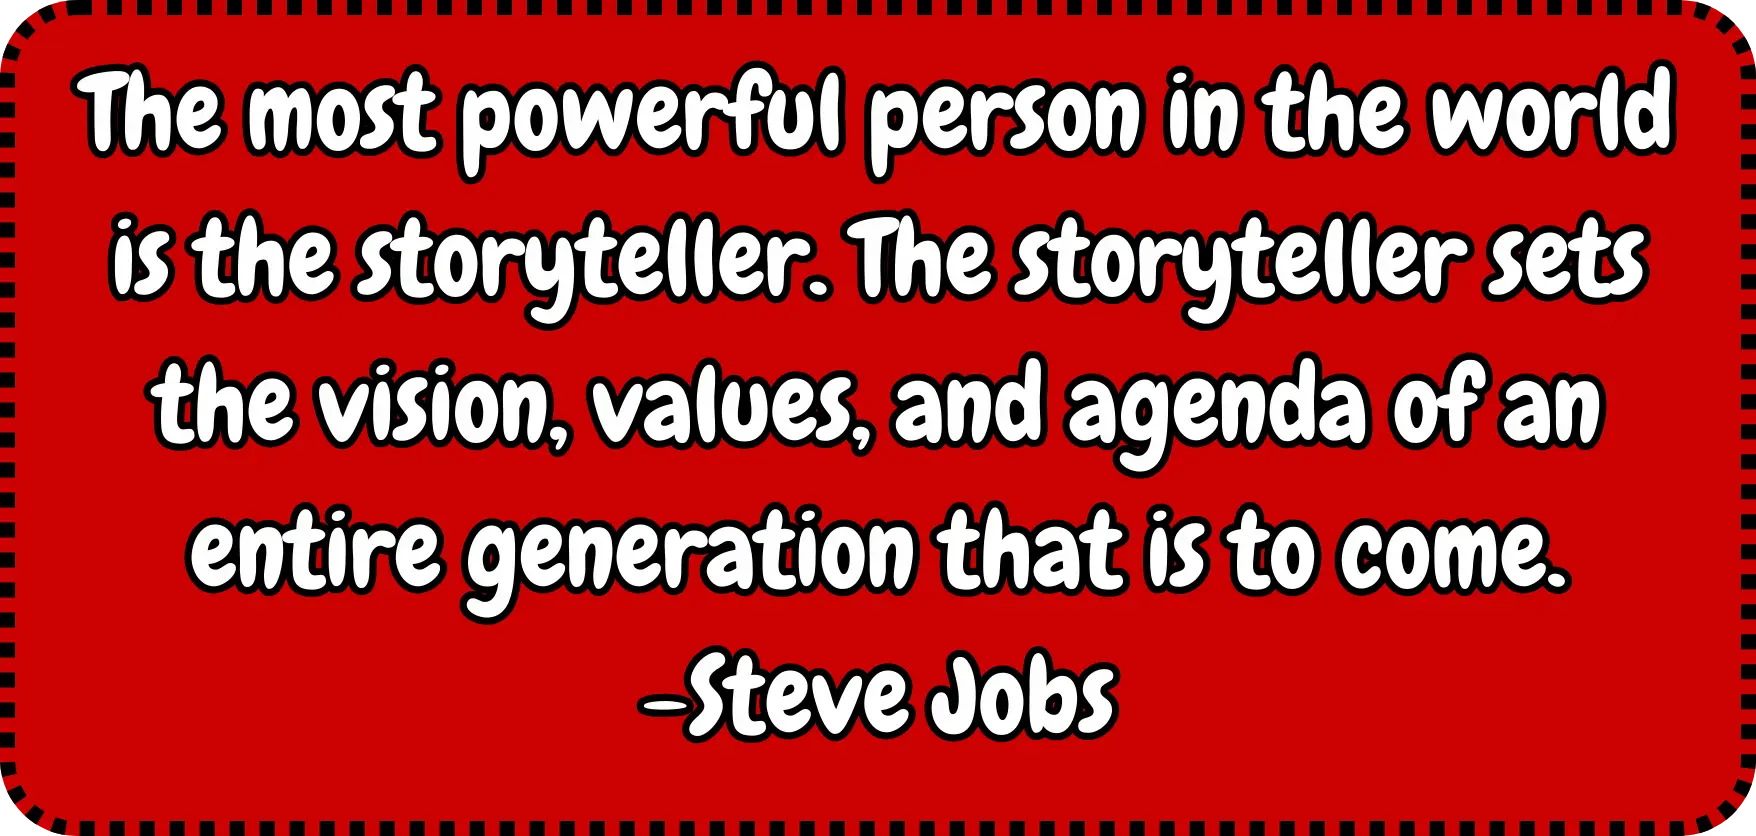 Quote: The Most Powerful person in the world is the storyteller. The storyteller sets the vision, values, and agenda of an entire generation that is to come. -Steve Jobs